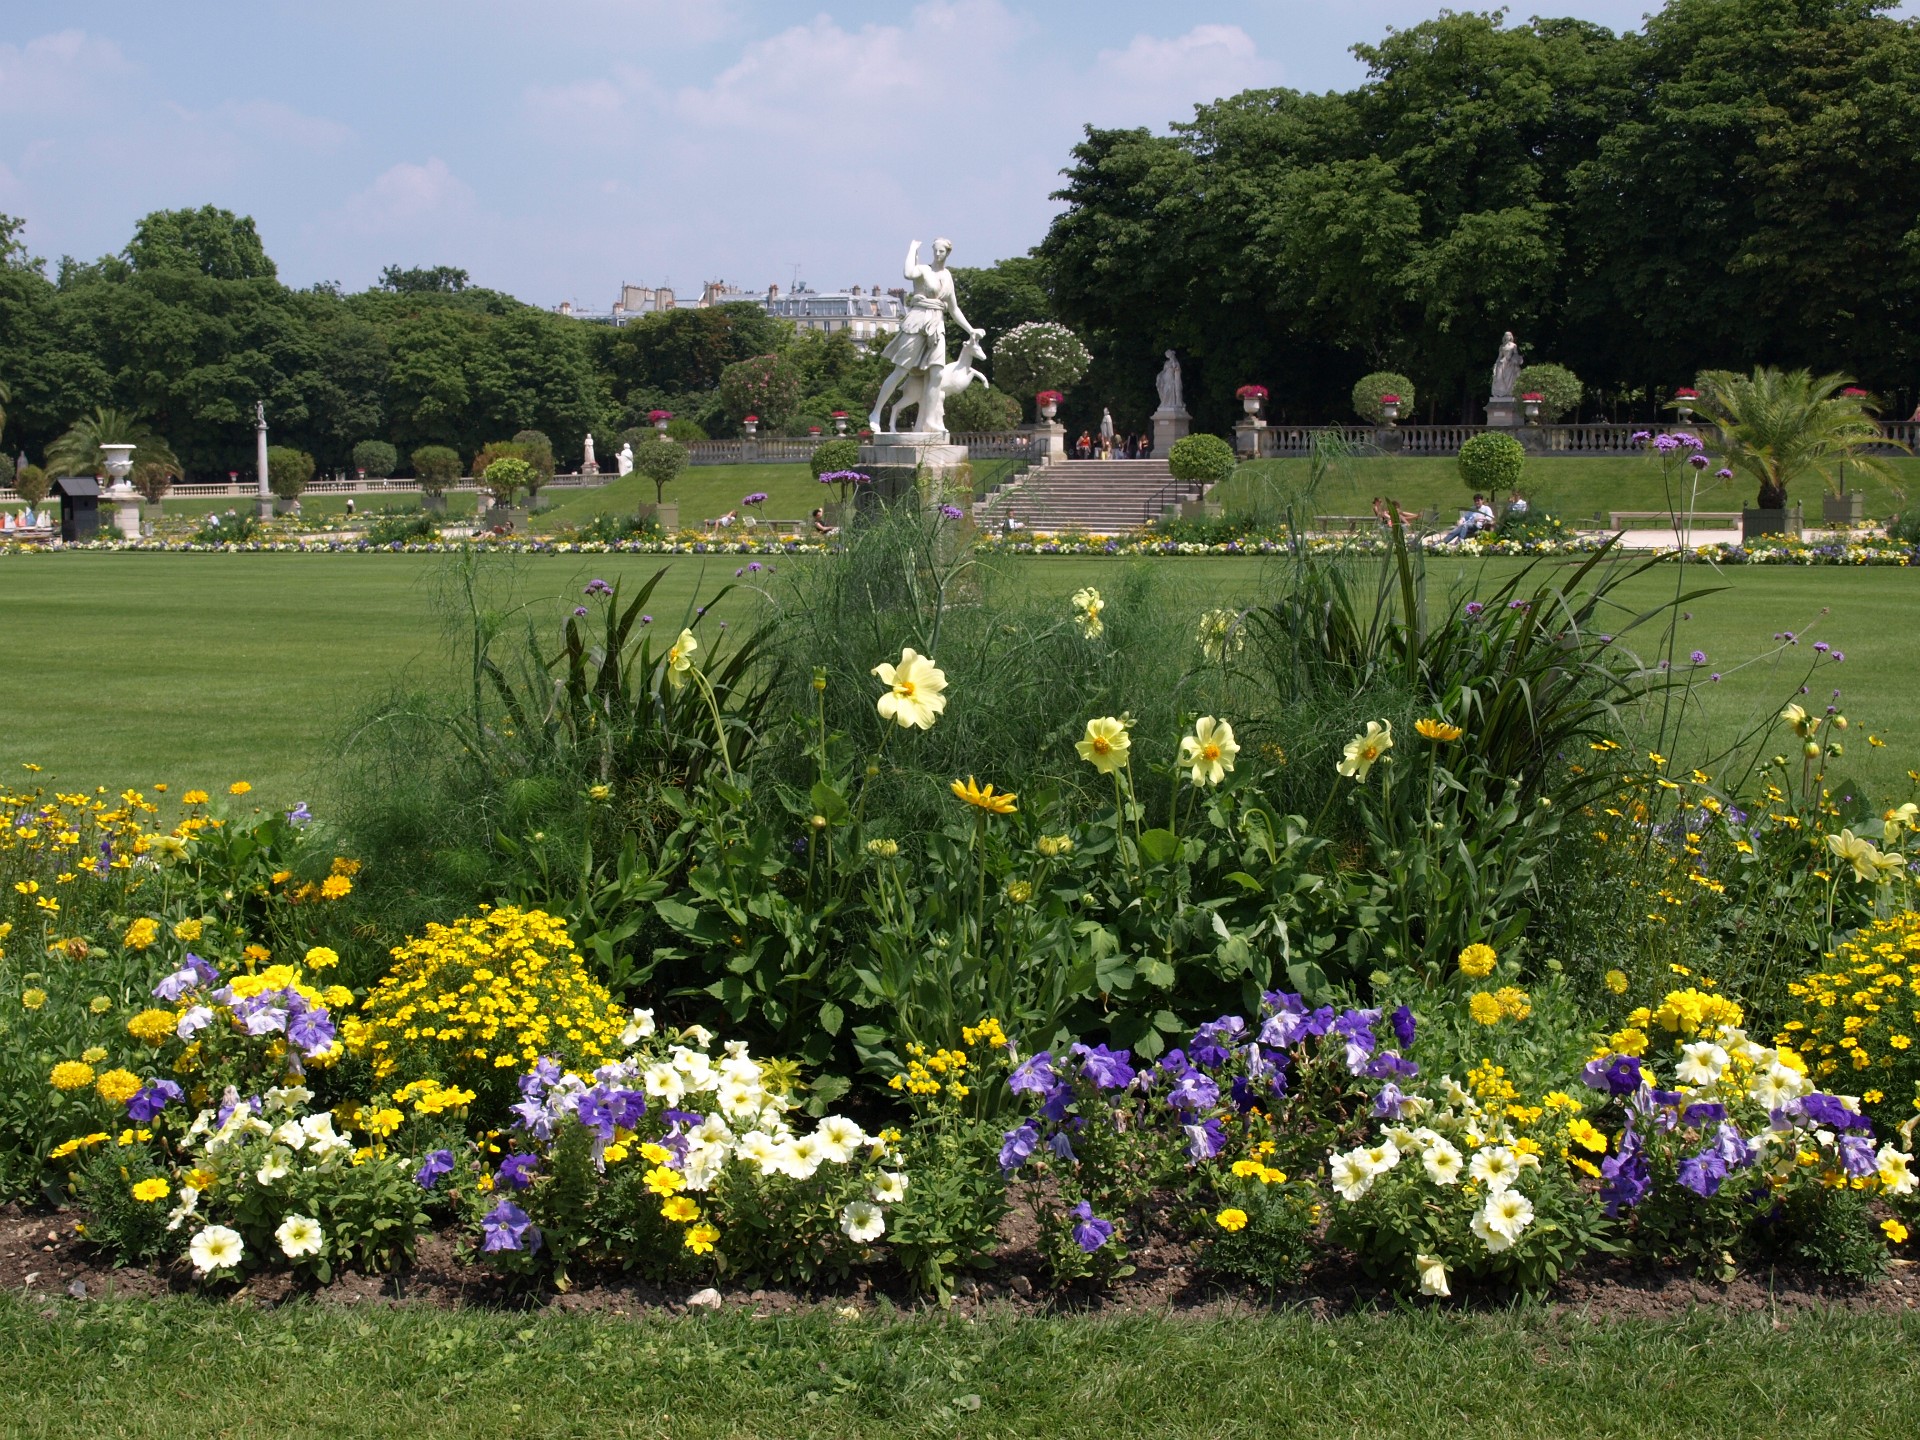 Flowers and Statues